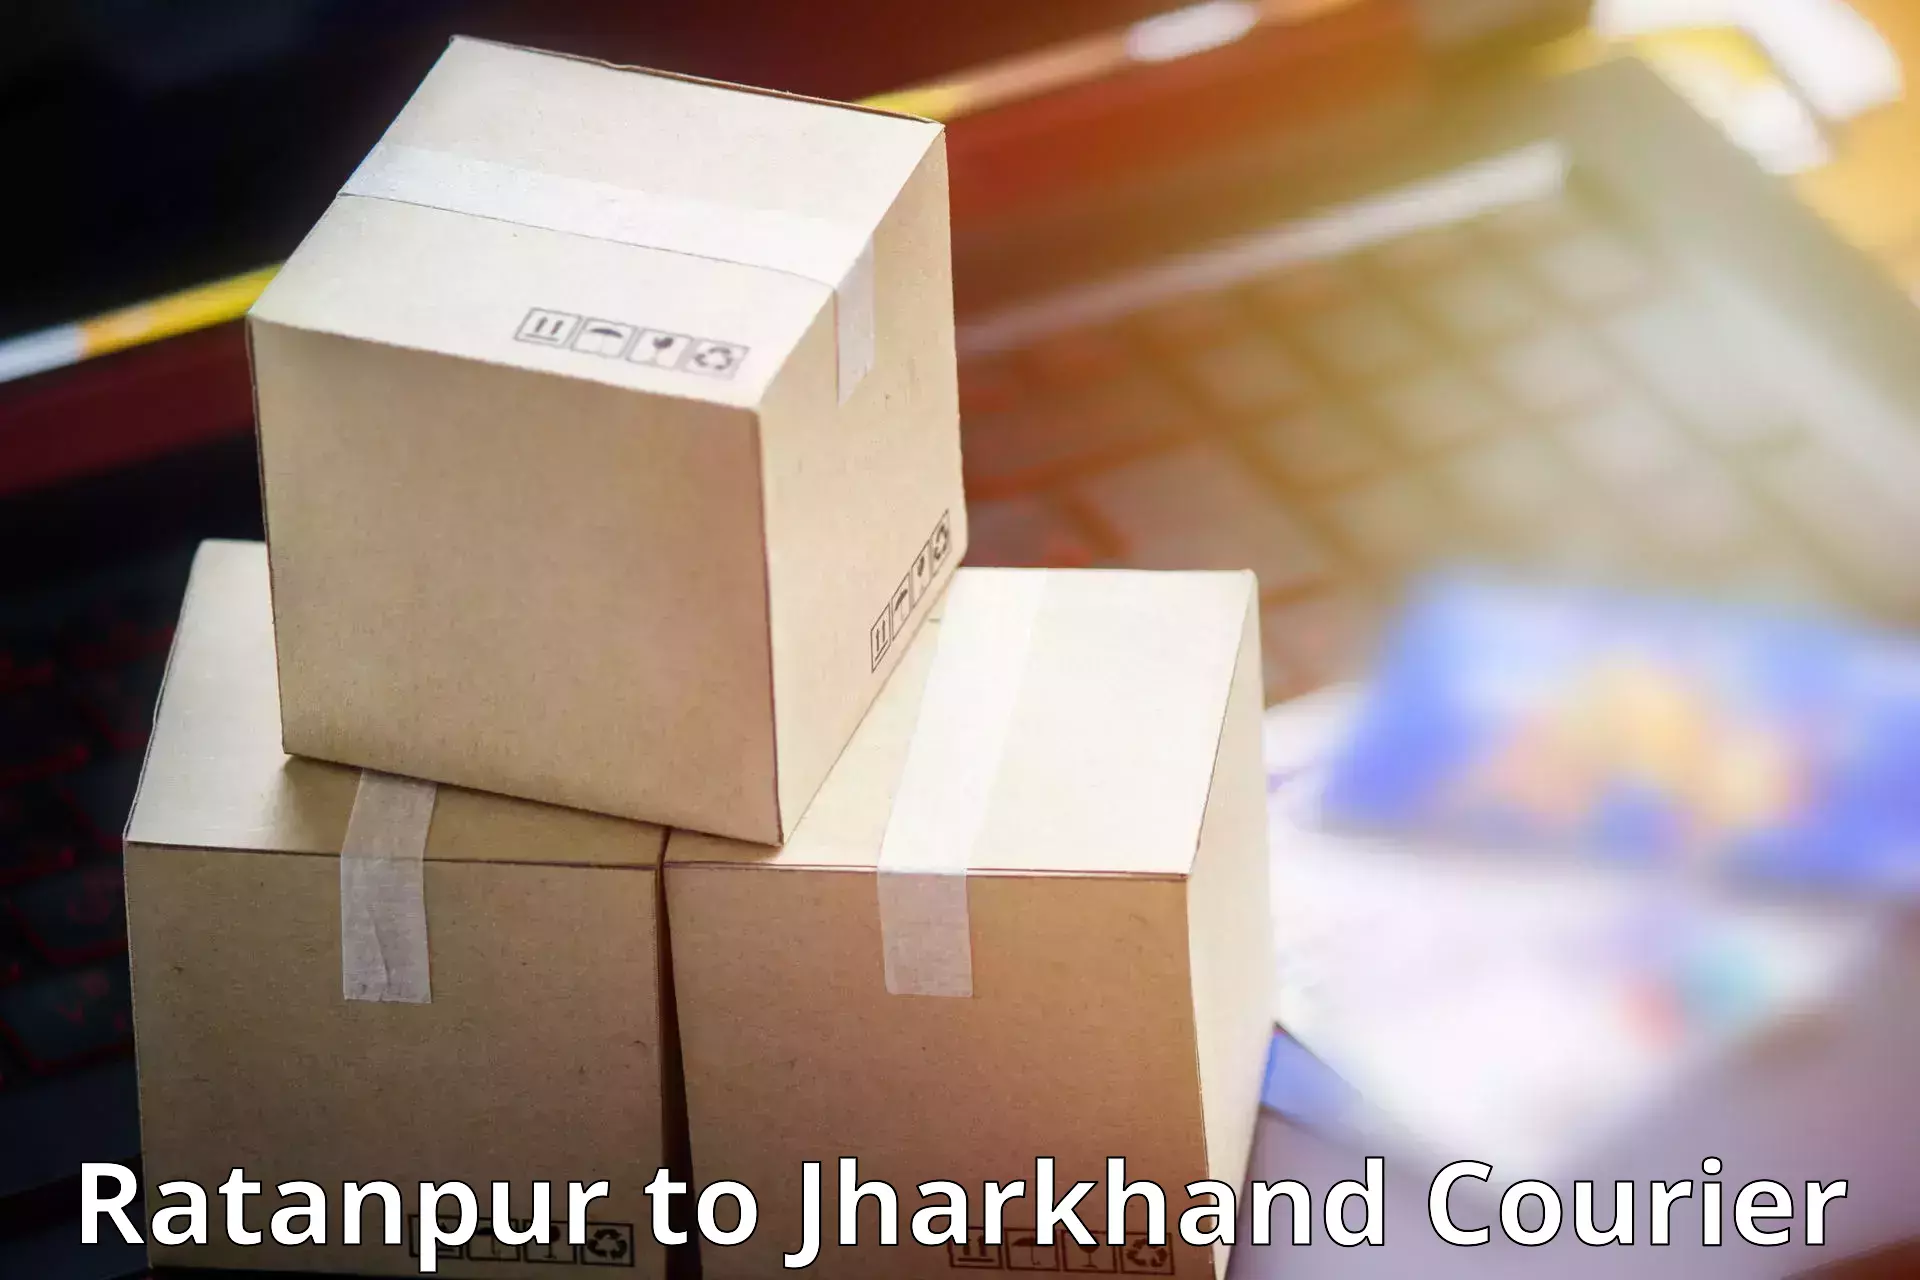 Cargo delivery service Ratanpur to Jharkhand